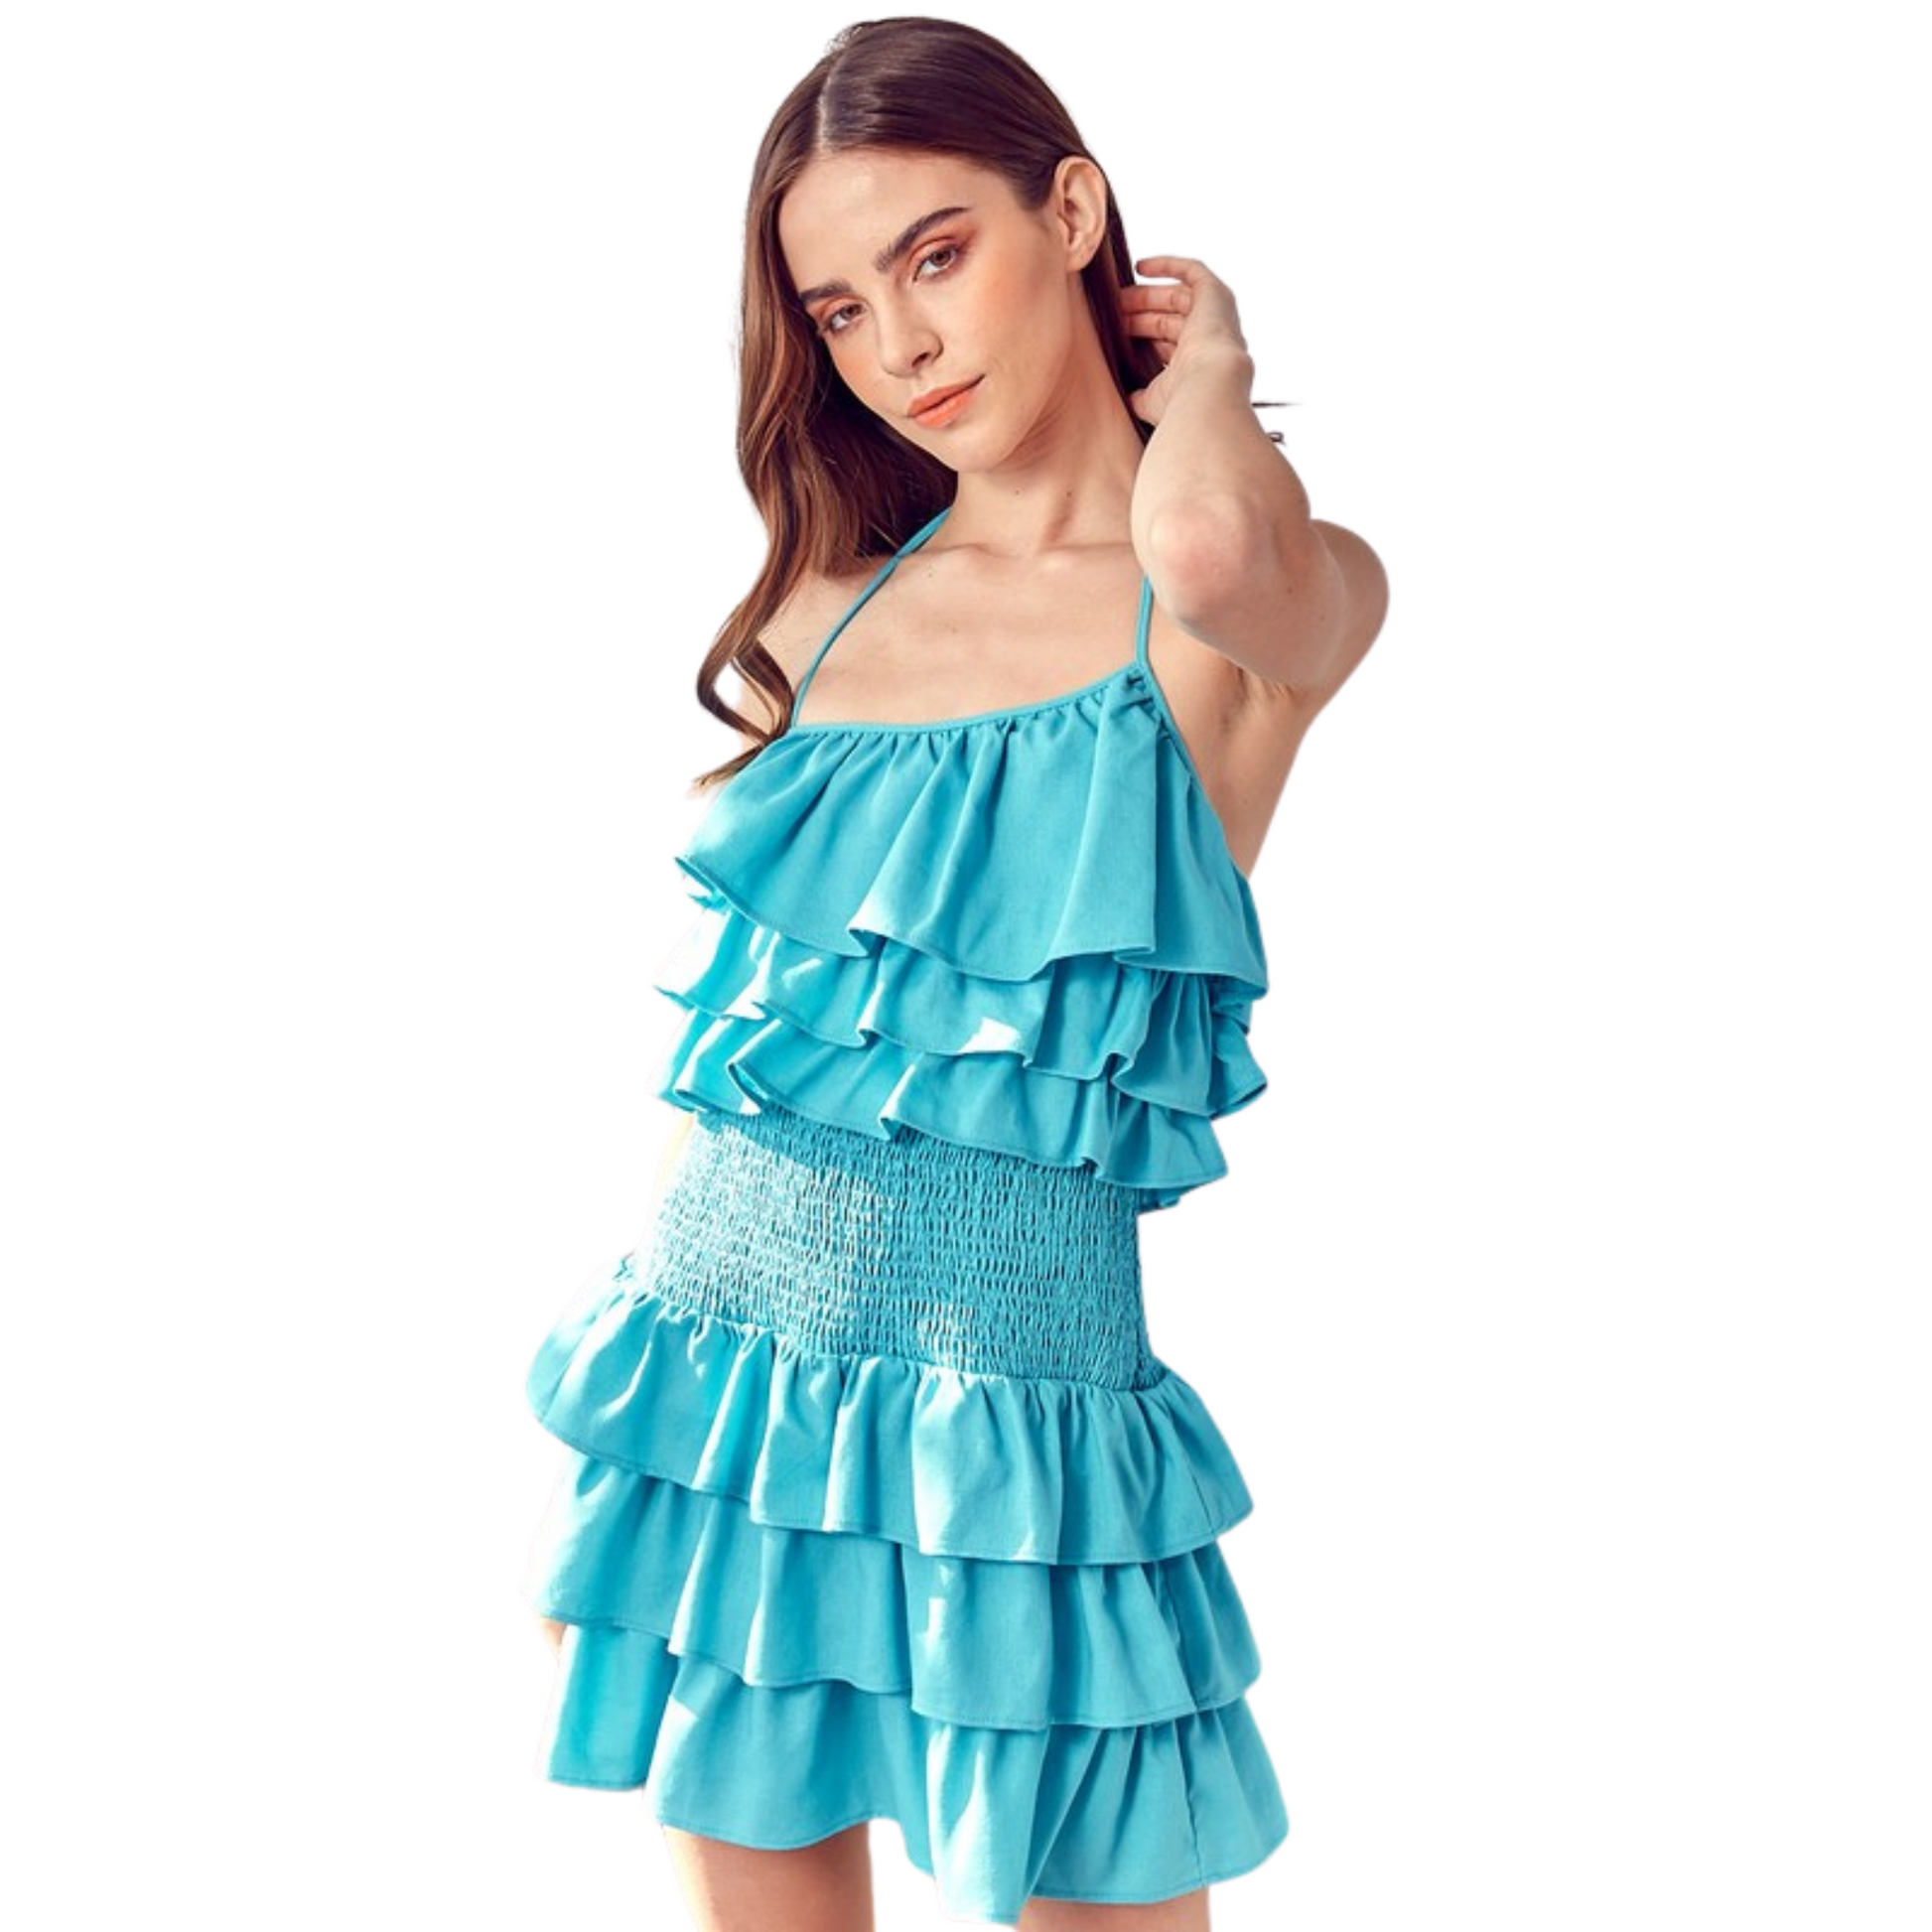 This Smocked Waist Ruffle Romper offers a combination of graceful style and effortless comfort. Featuring a smocked waist and a tiered ruffle design, the romper is available in aqua and pink colors, and features a flattering halter top. Perfect for any summer occasion!